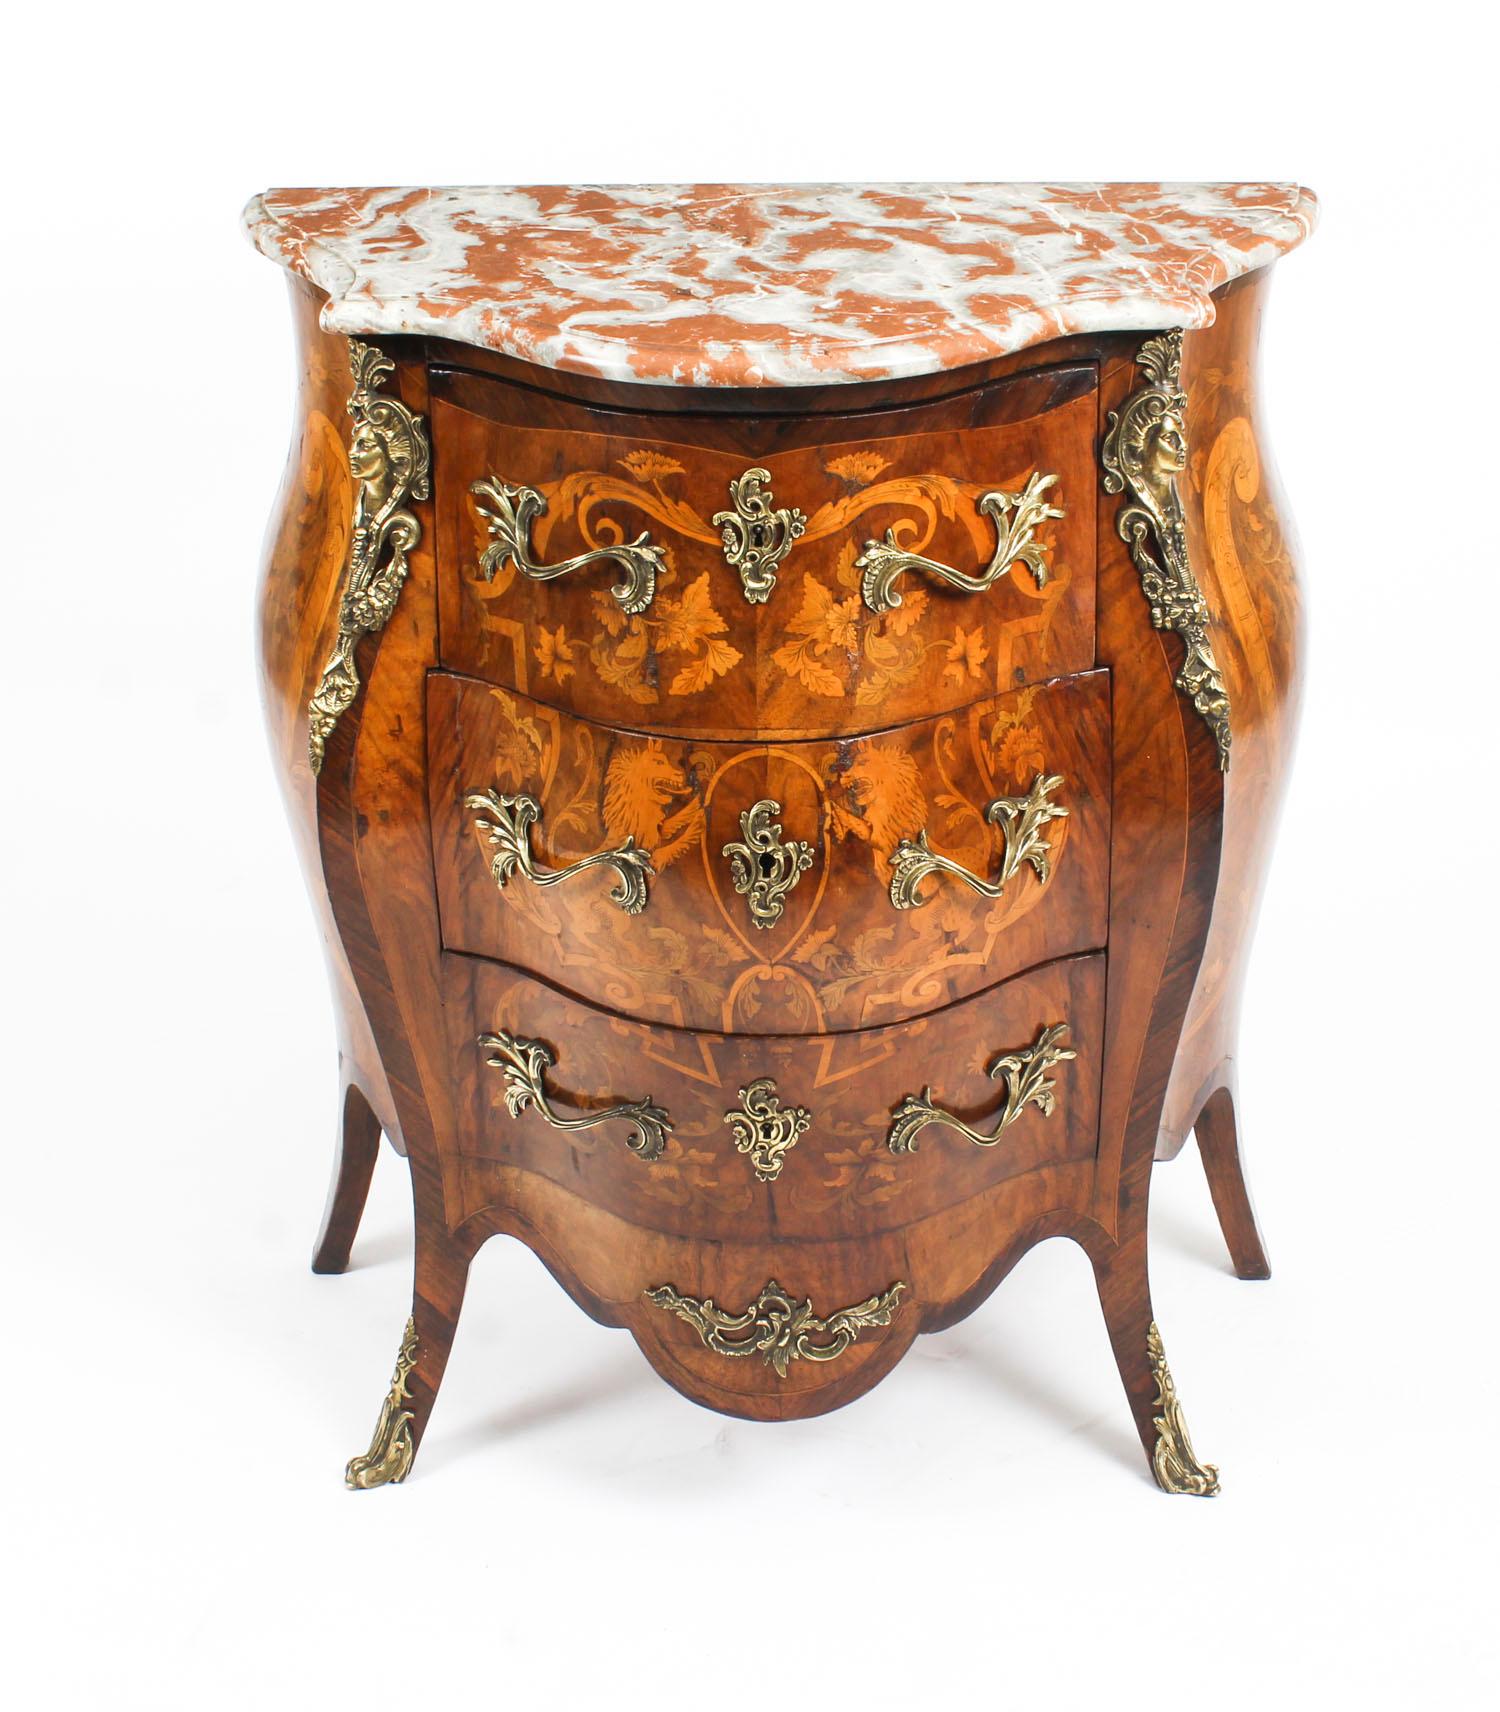 This is a stunning antique French Louis Revival burr walnut serpentine fronted bombe' marble top commode, circa 1880 in date. 

This gorgeous commode has three graduated drawers for ample storage, and was inspired by the Louis XV style.